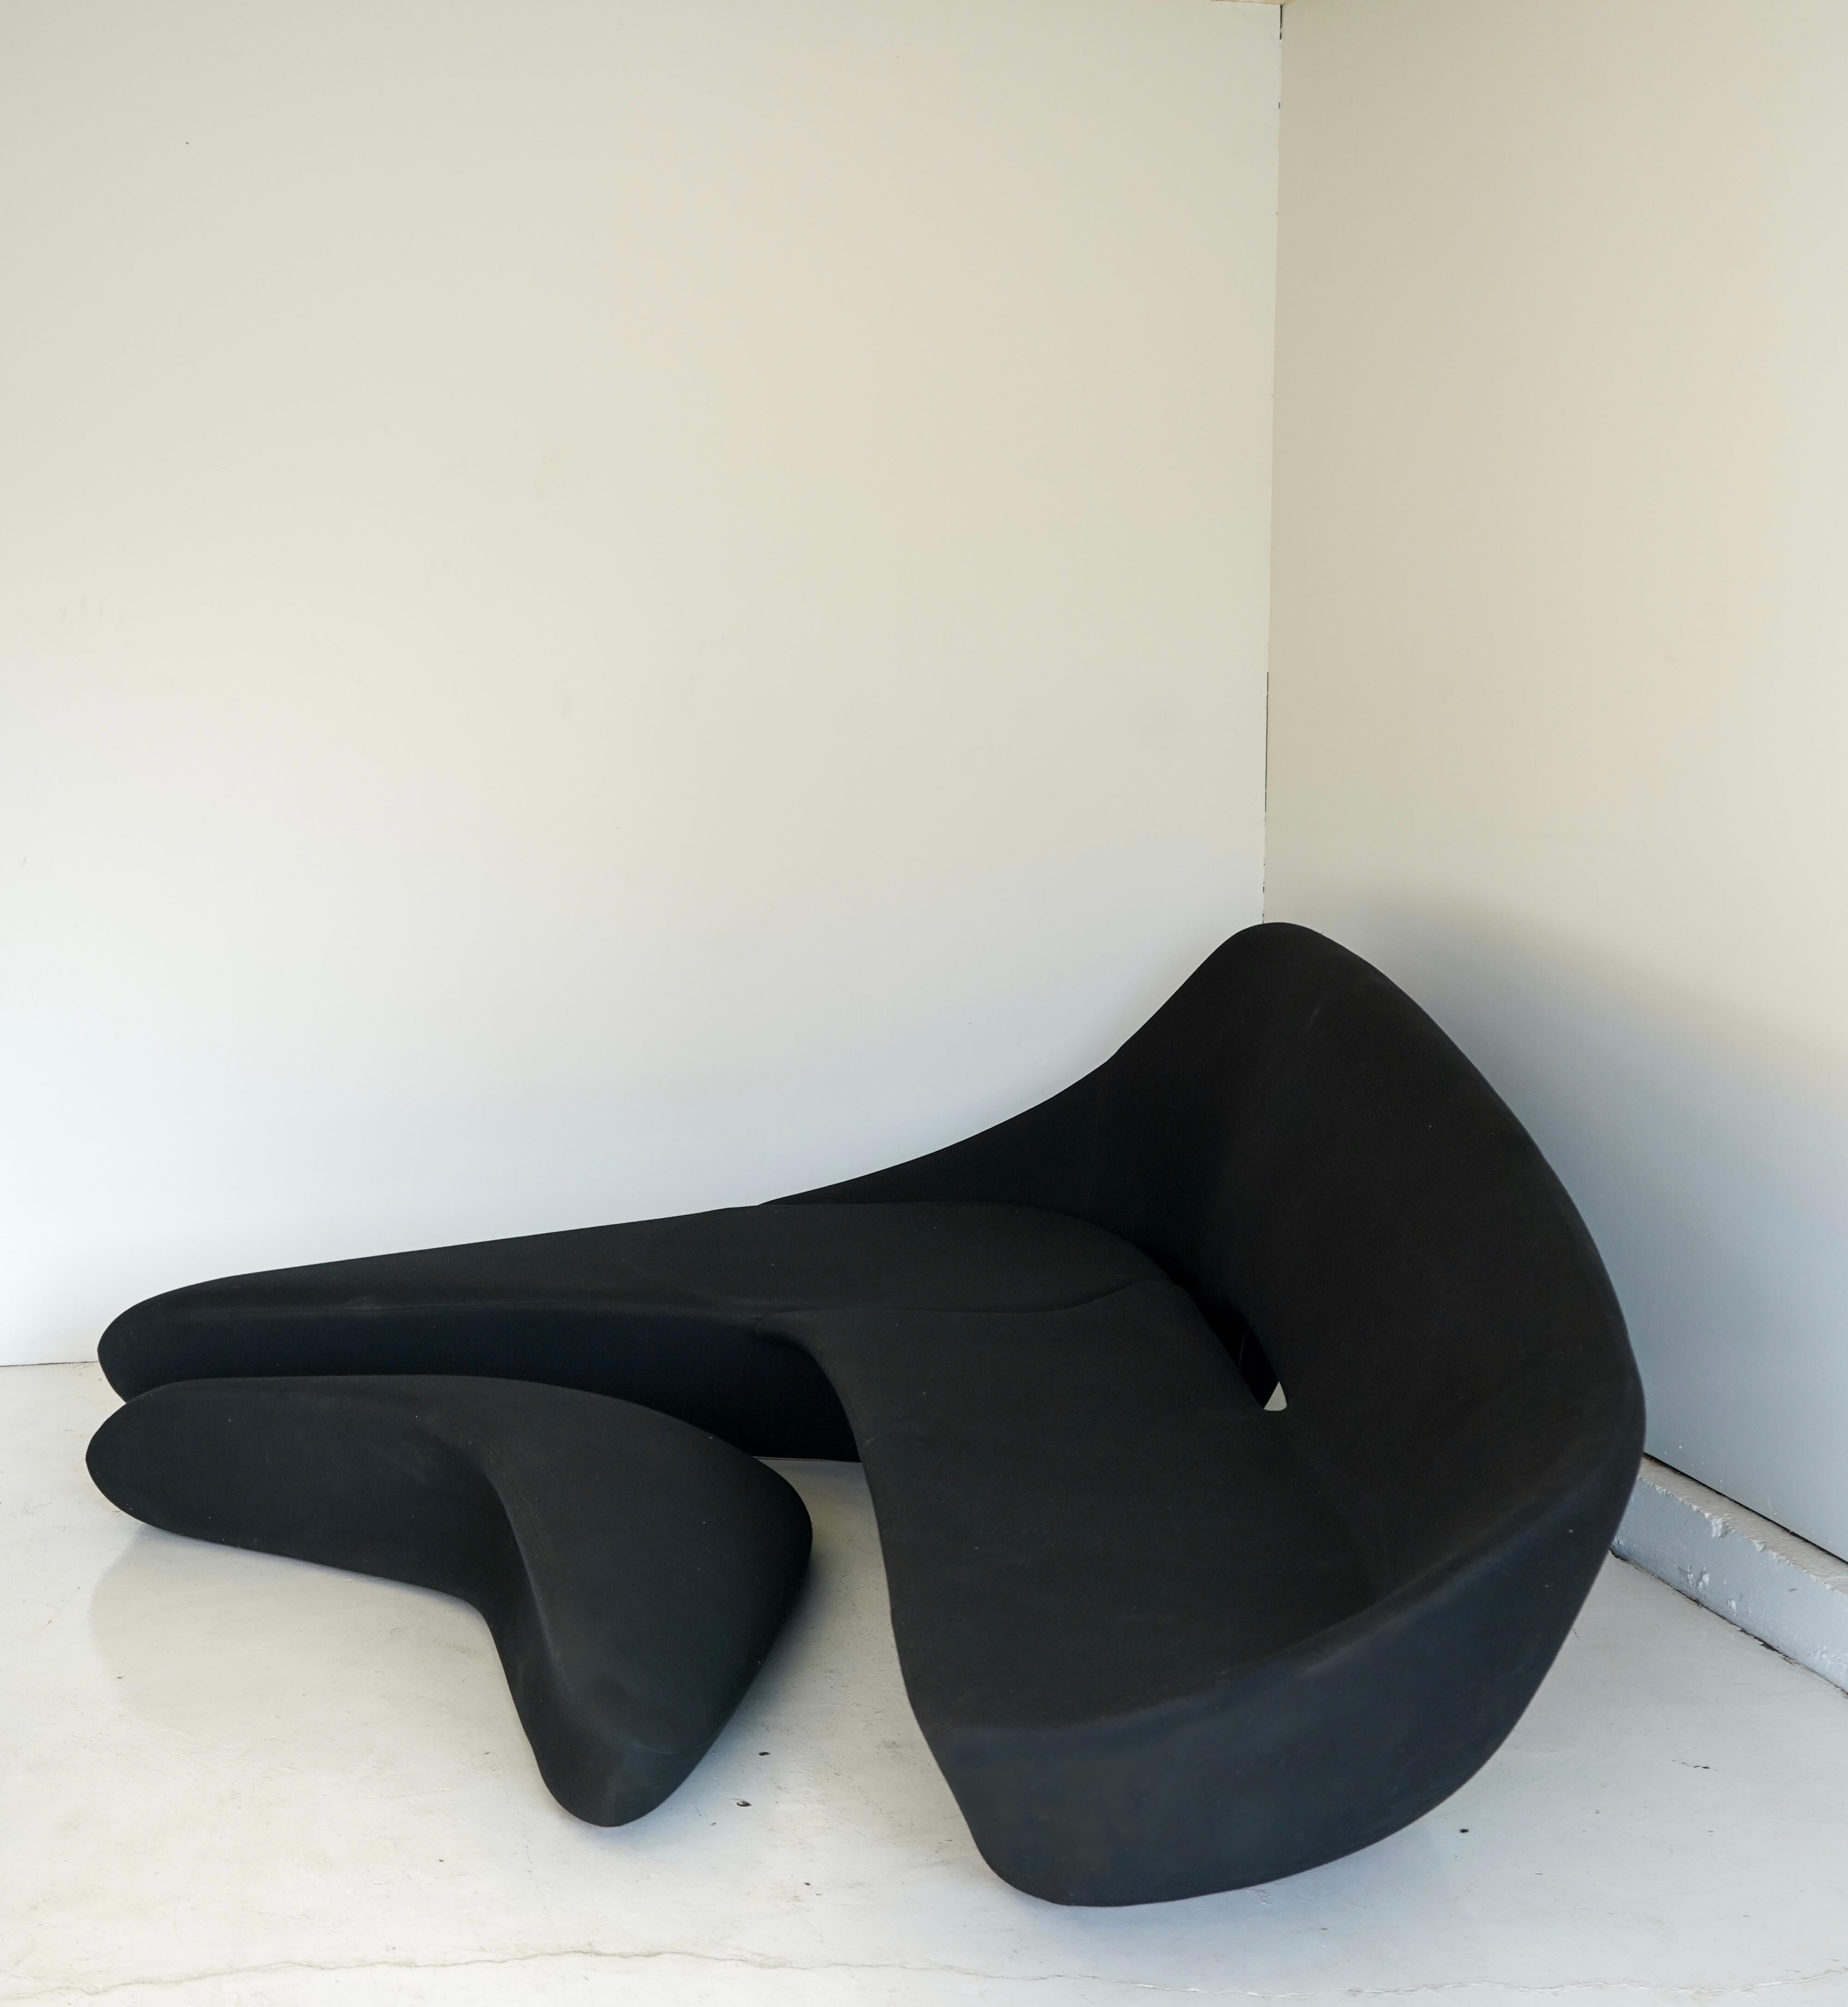 Moon sofa and ottoman by trailblazing Iraqi architect Zaha Hadid. Featuring all the swooping drama and undulating curves Hadid’s buildings became iconic for, this set also features an ottoman that perfectly nests into the lower portion of the sofa.